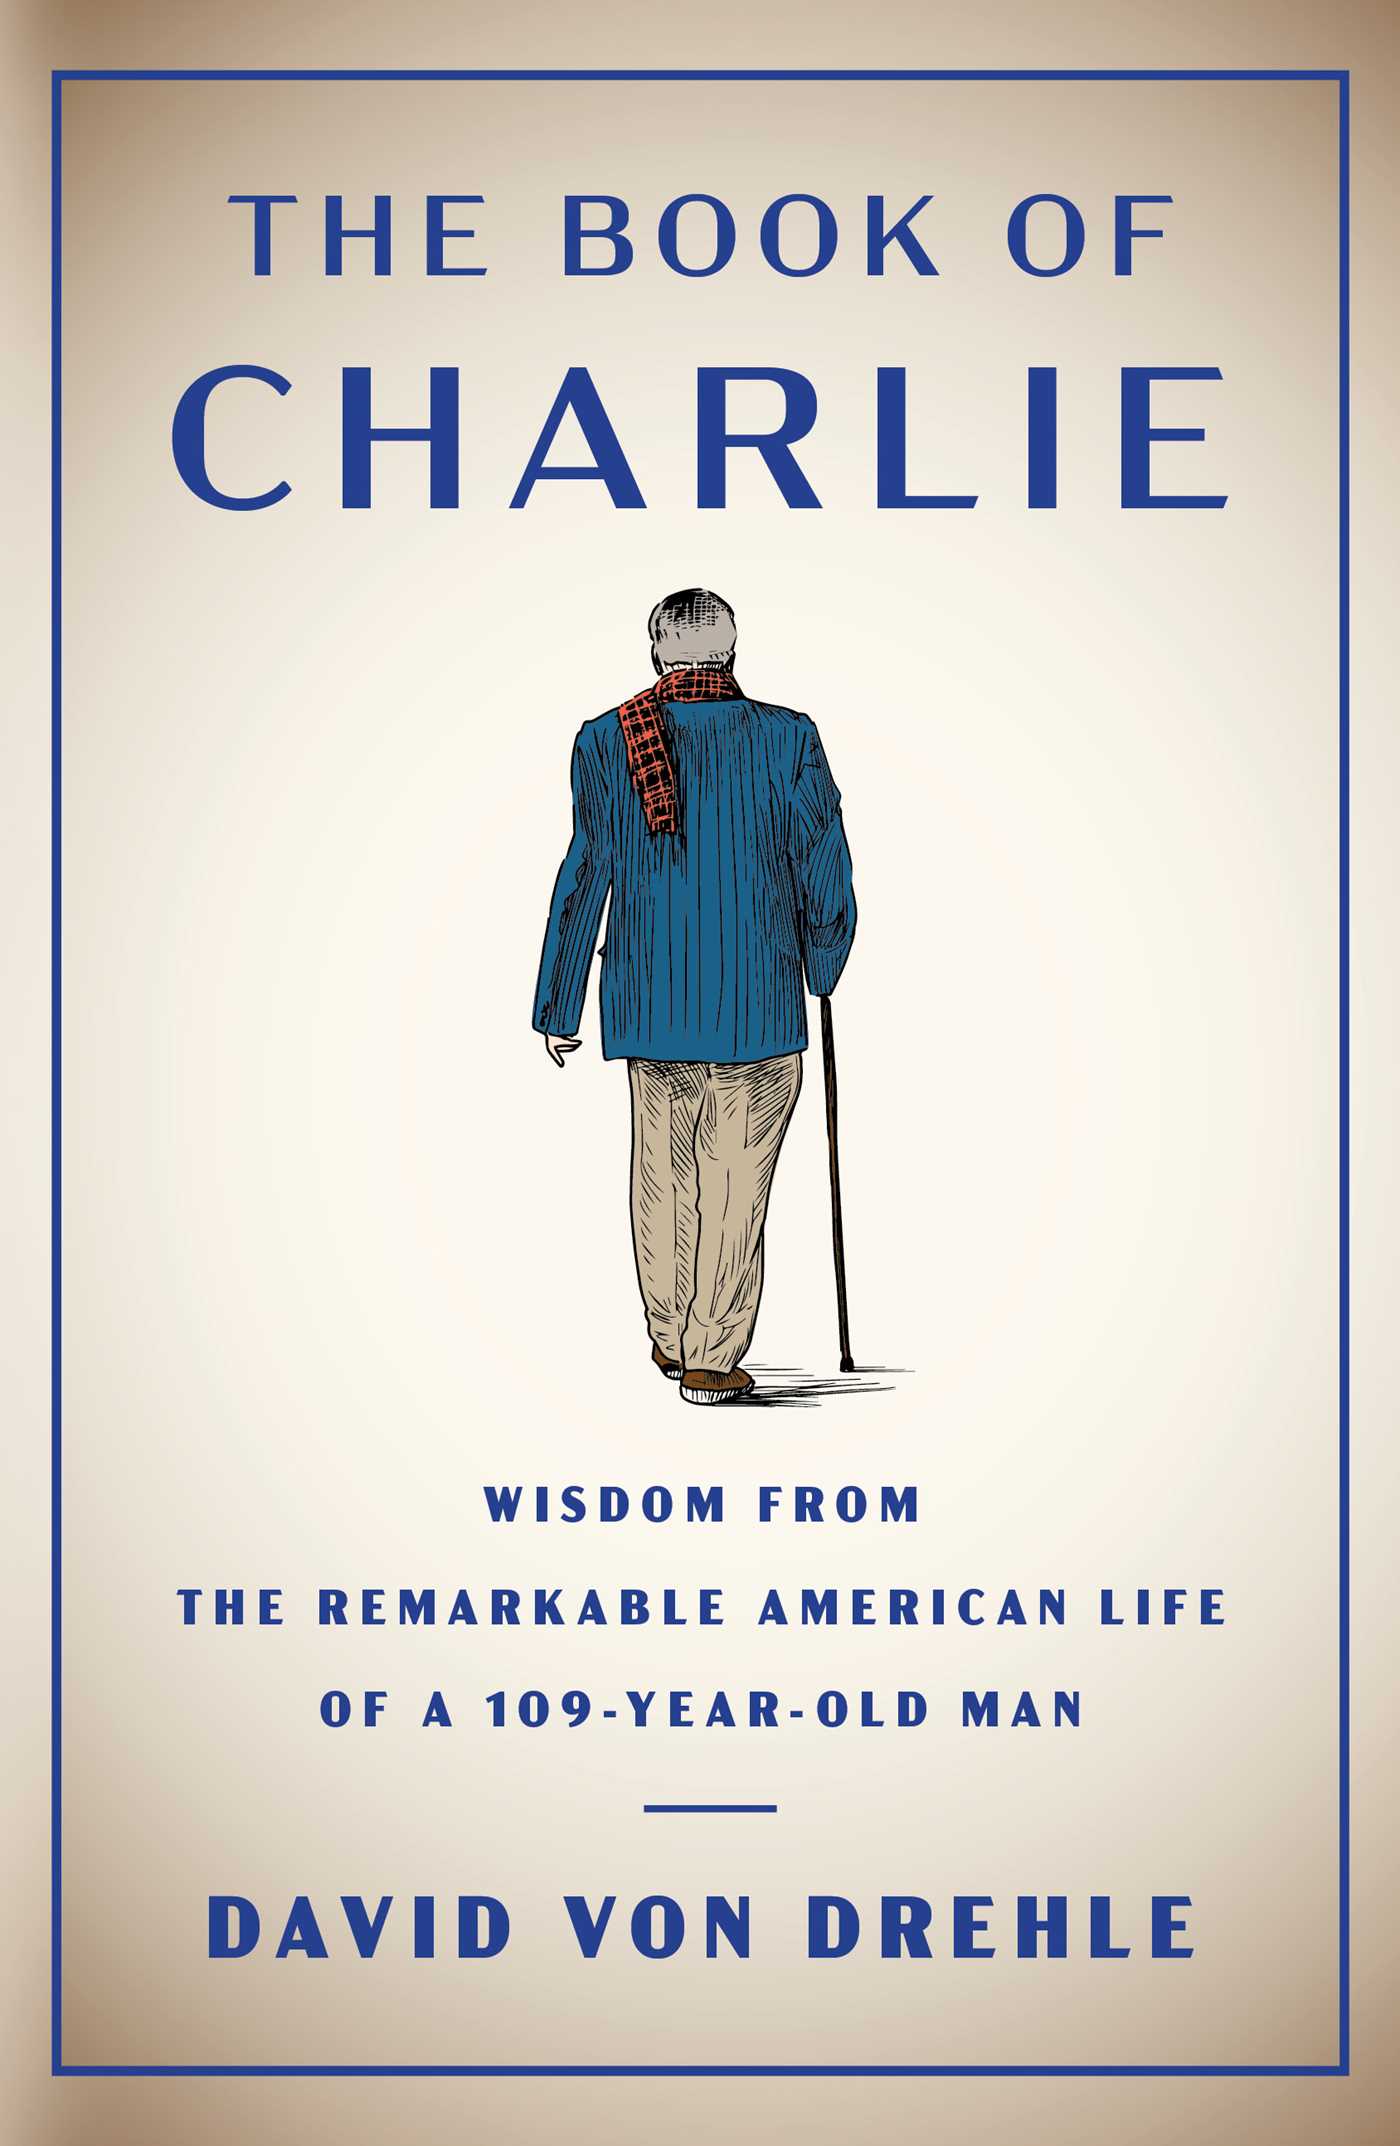 Book of Charlie cover